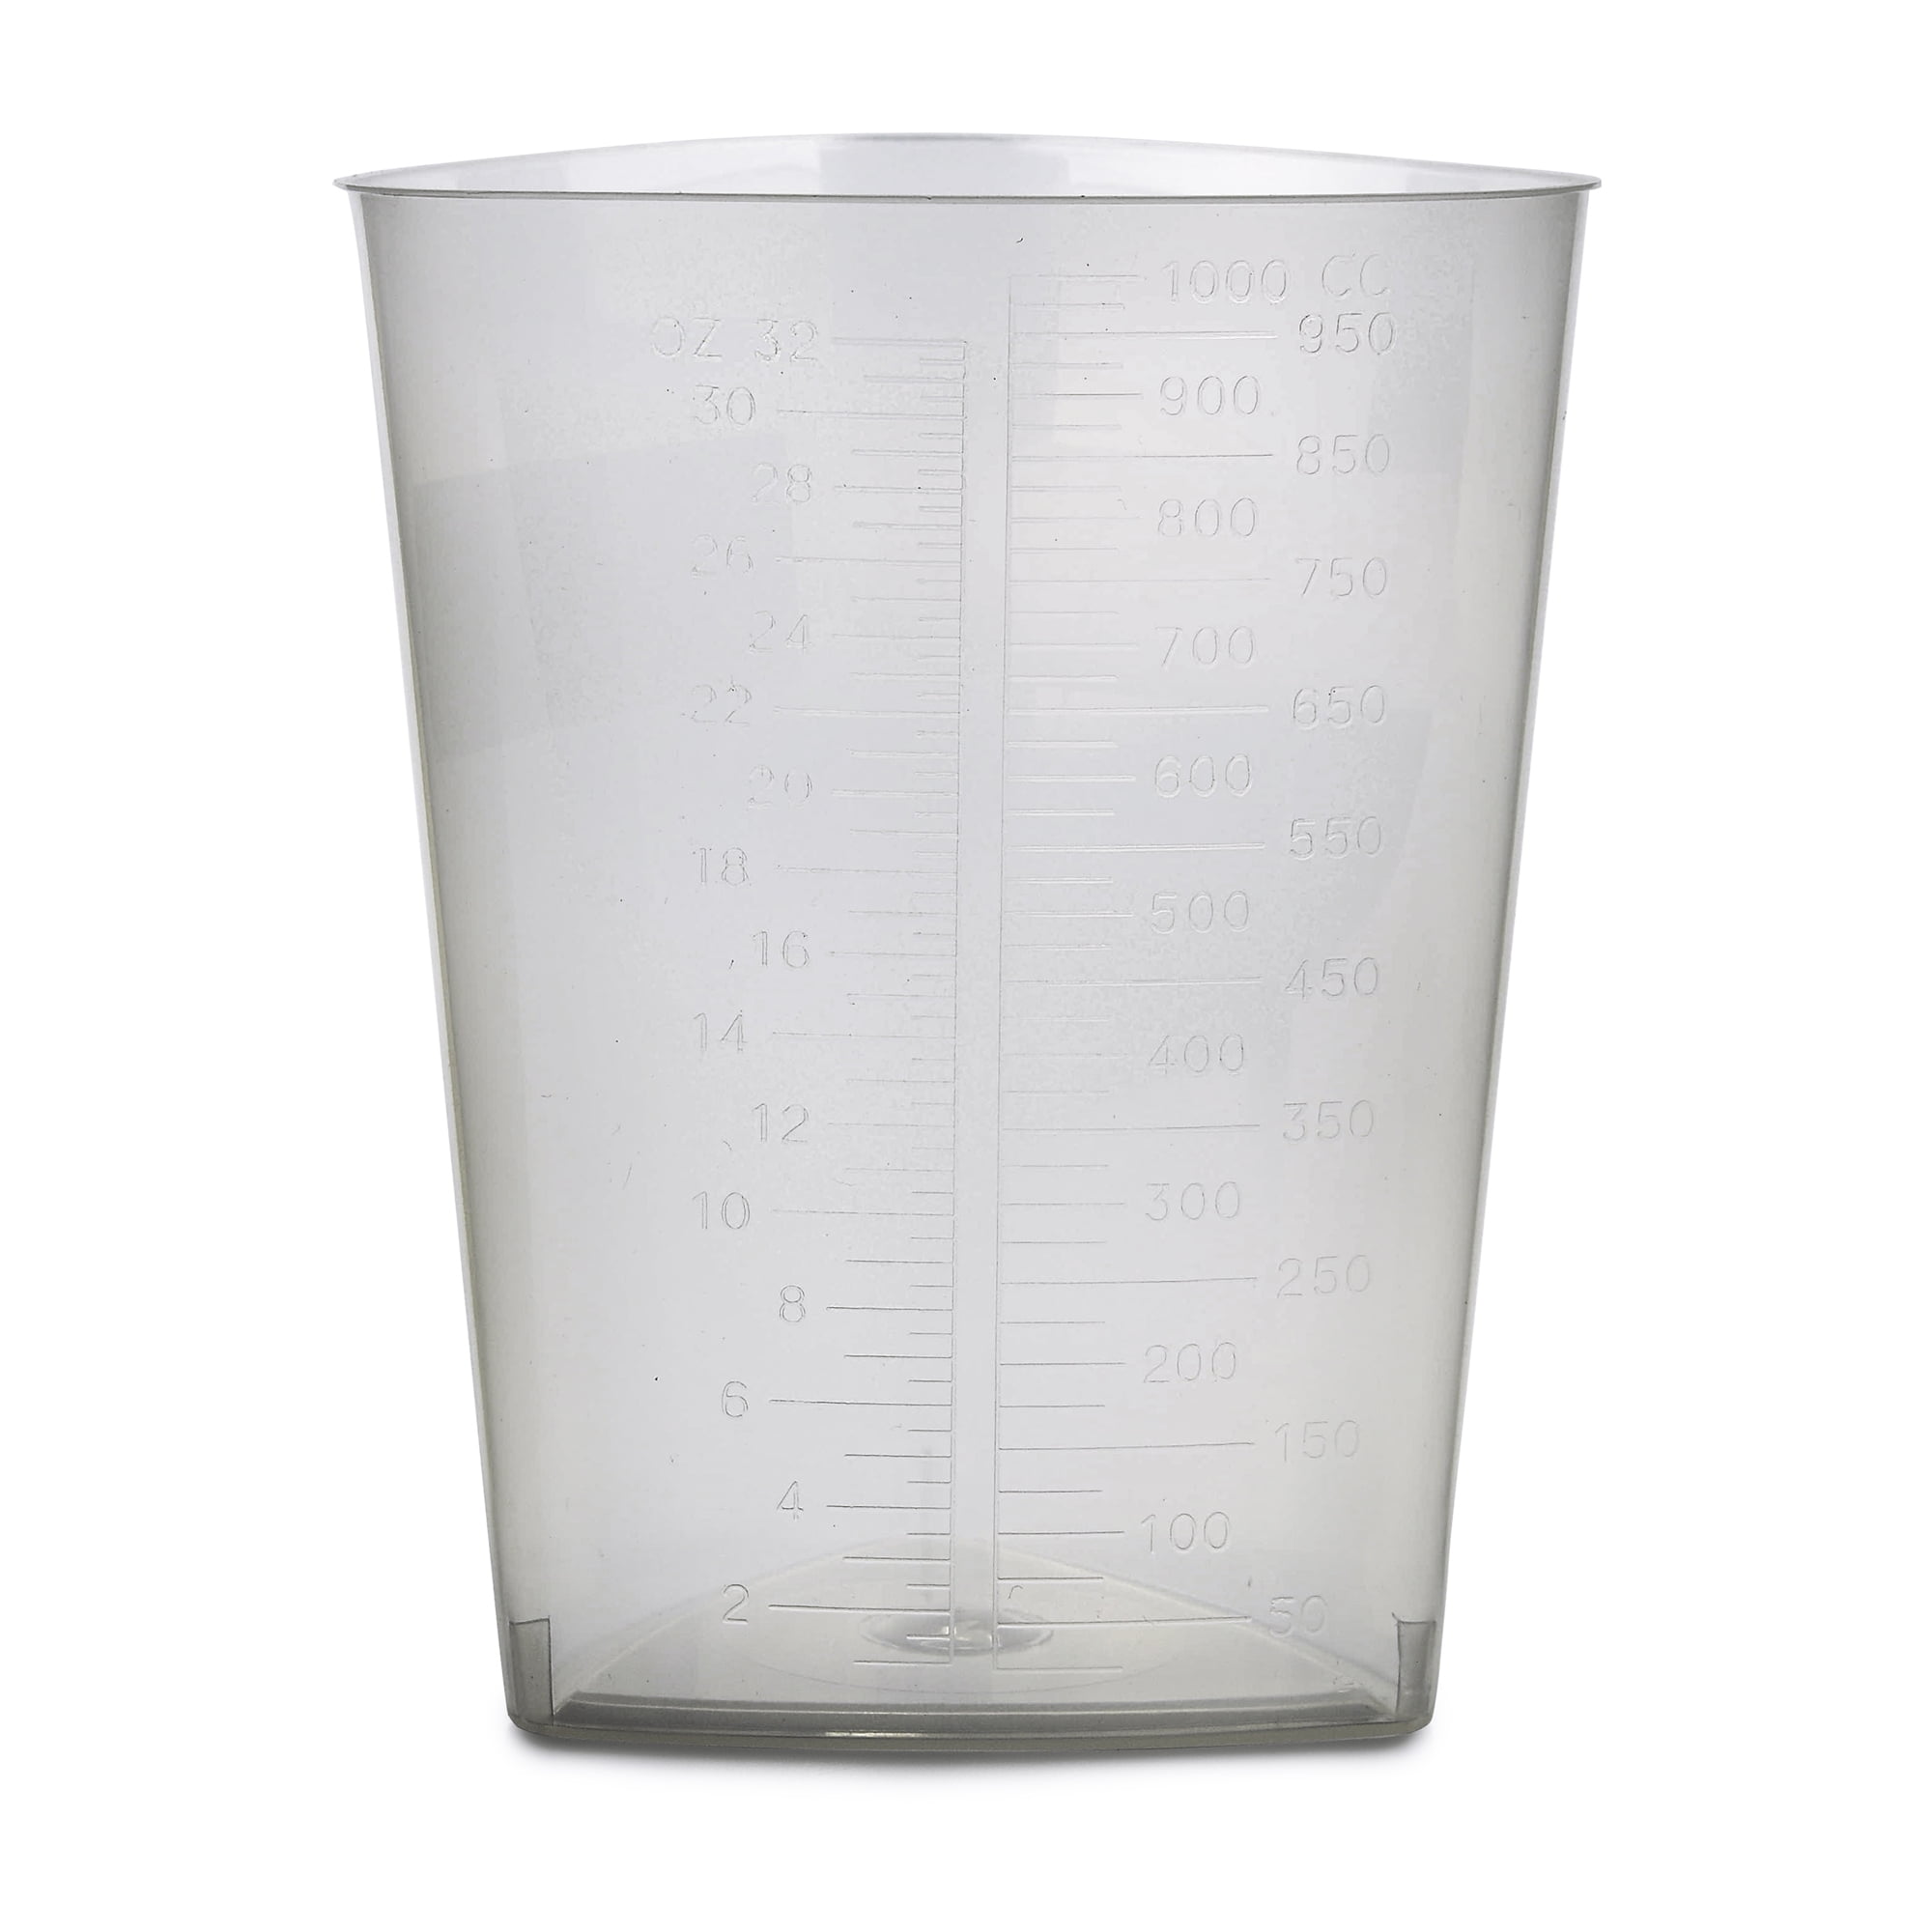 Wholesale ml measuring cup that Combines Accuracy with Convenience –